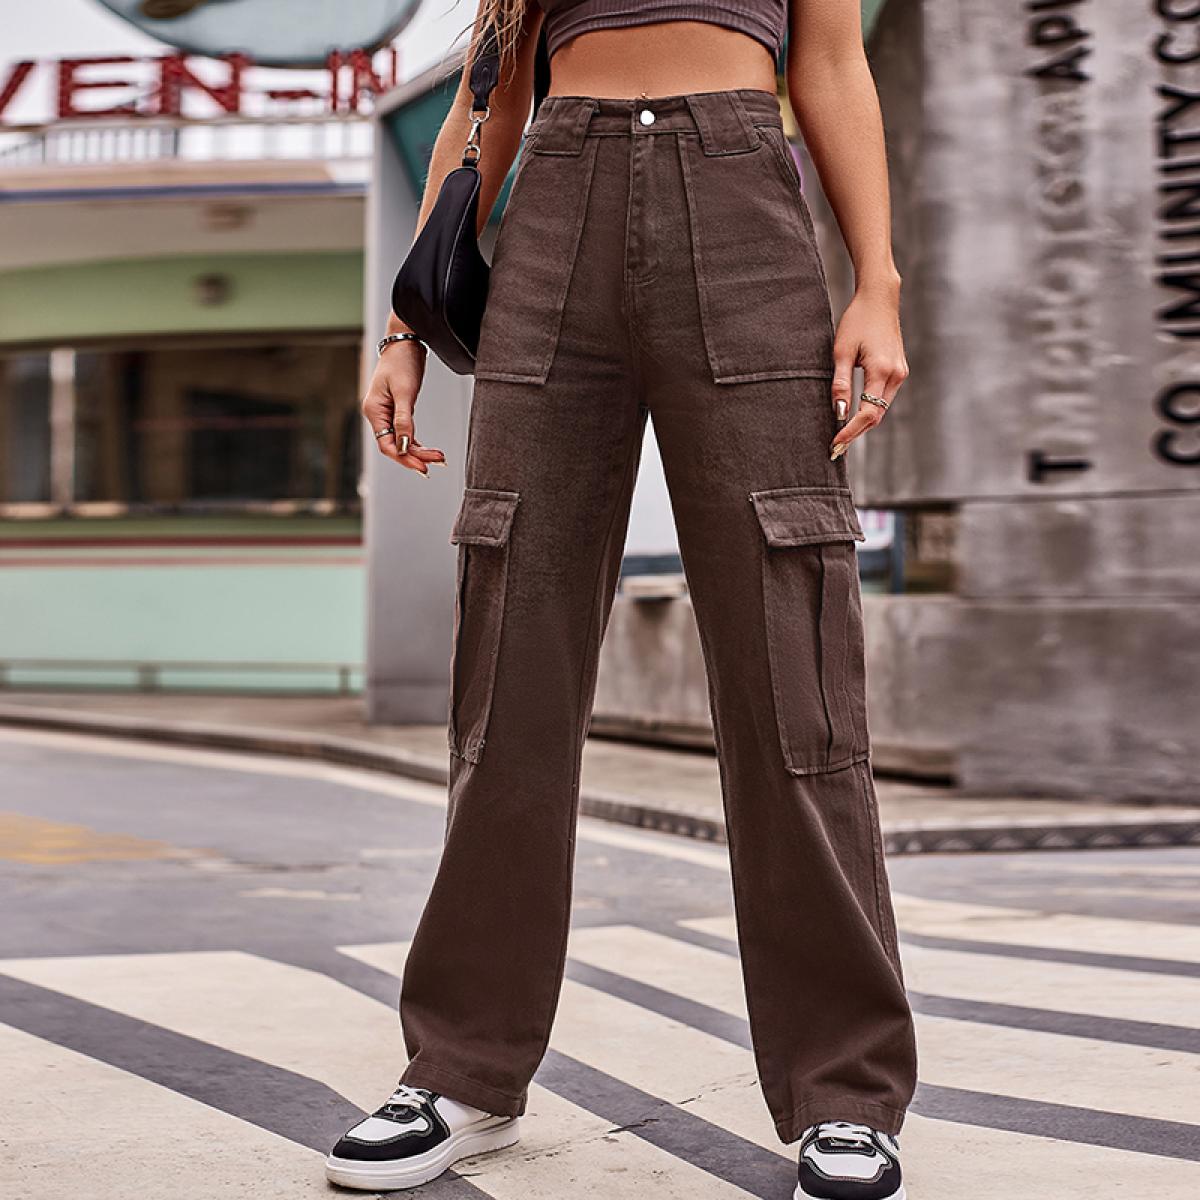 Brown Cargo Pants Outfits For Women (7 ideas & outfits)